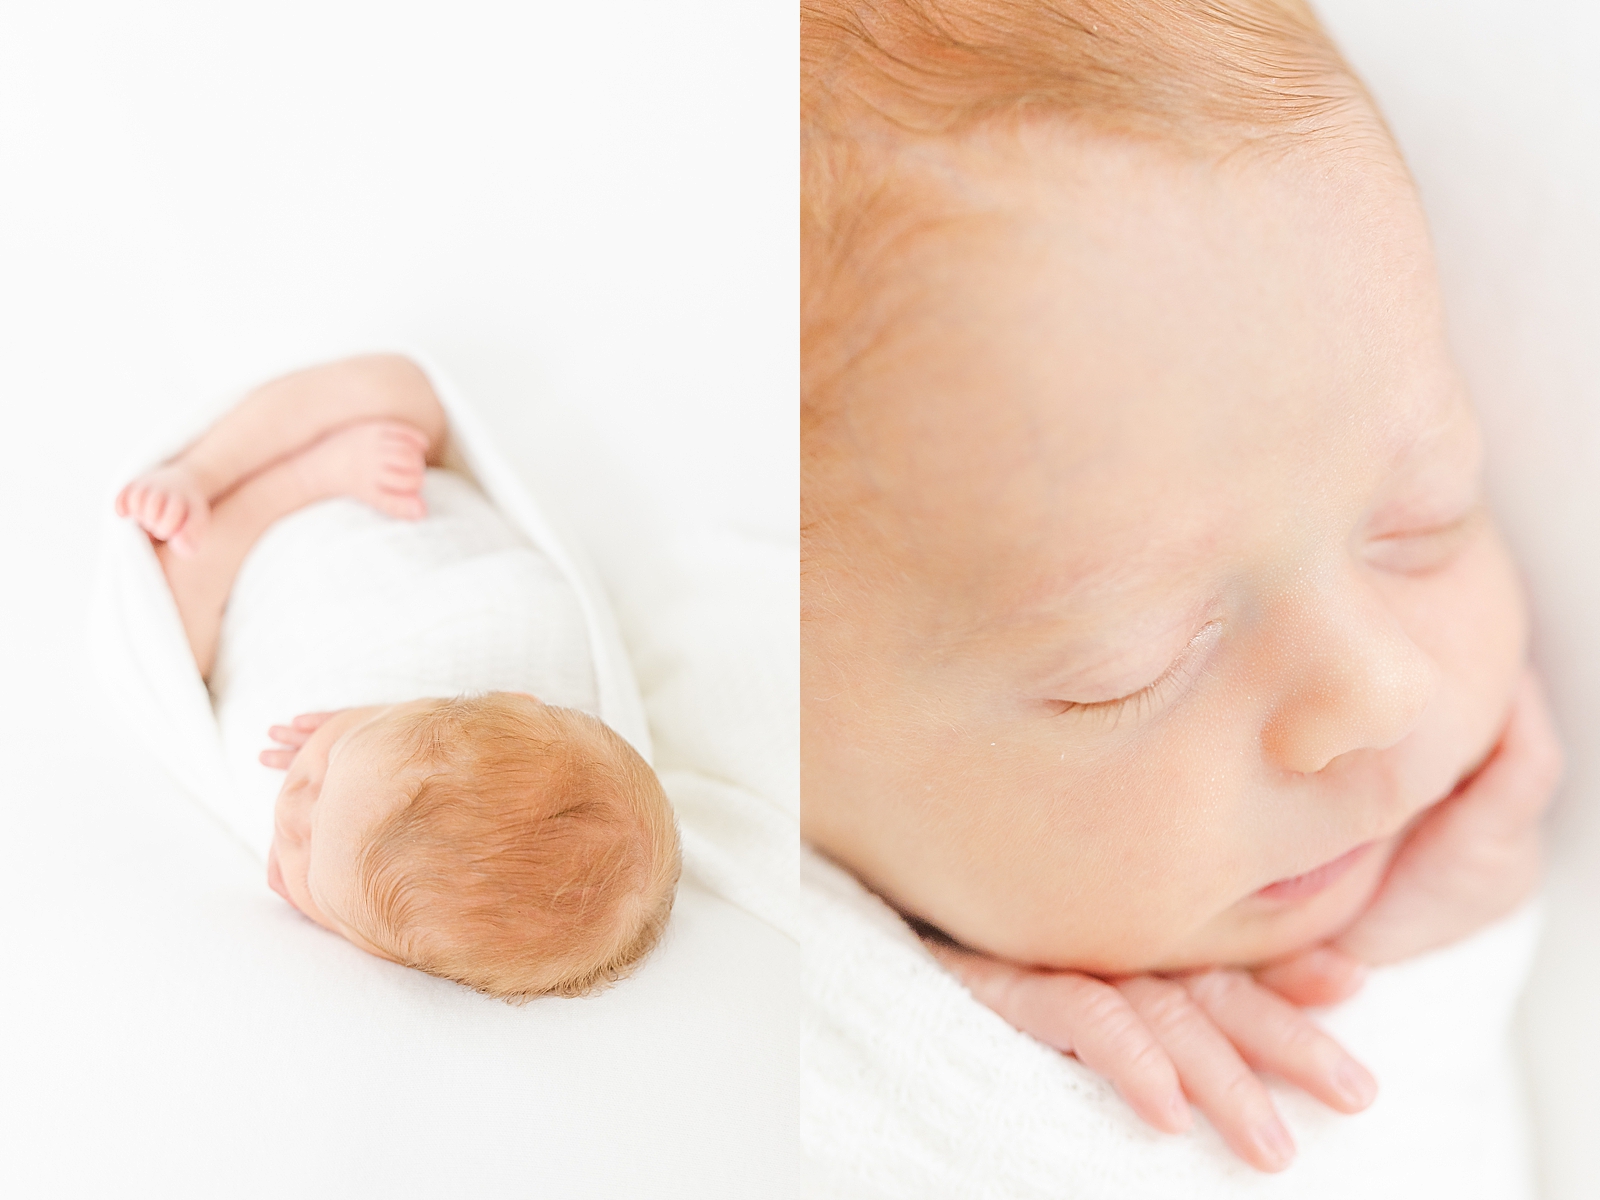 Newborn baby details of top of head and eyelashes while baby is swaddled and asleep on a white backdrop